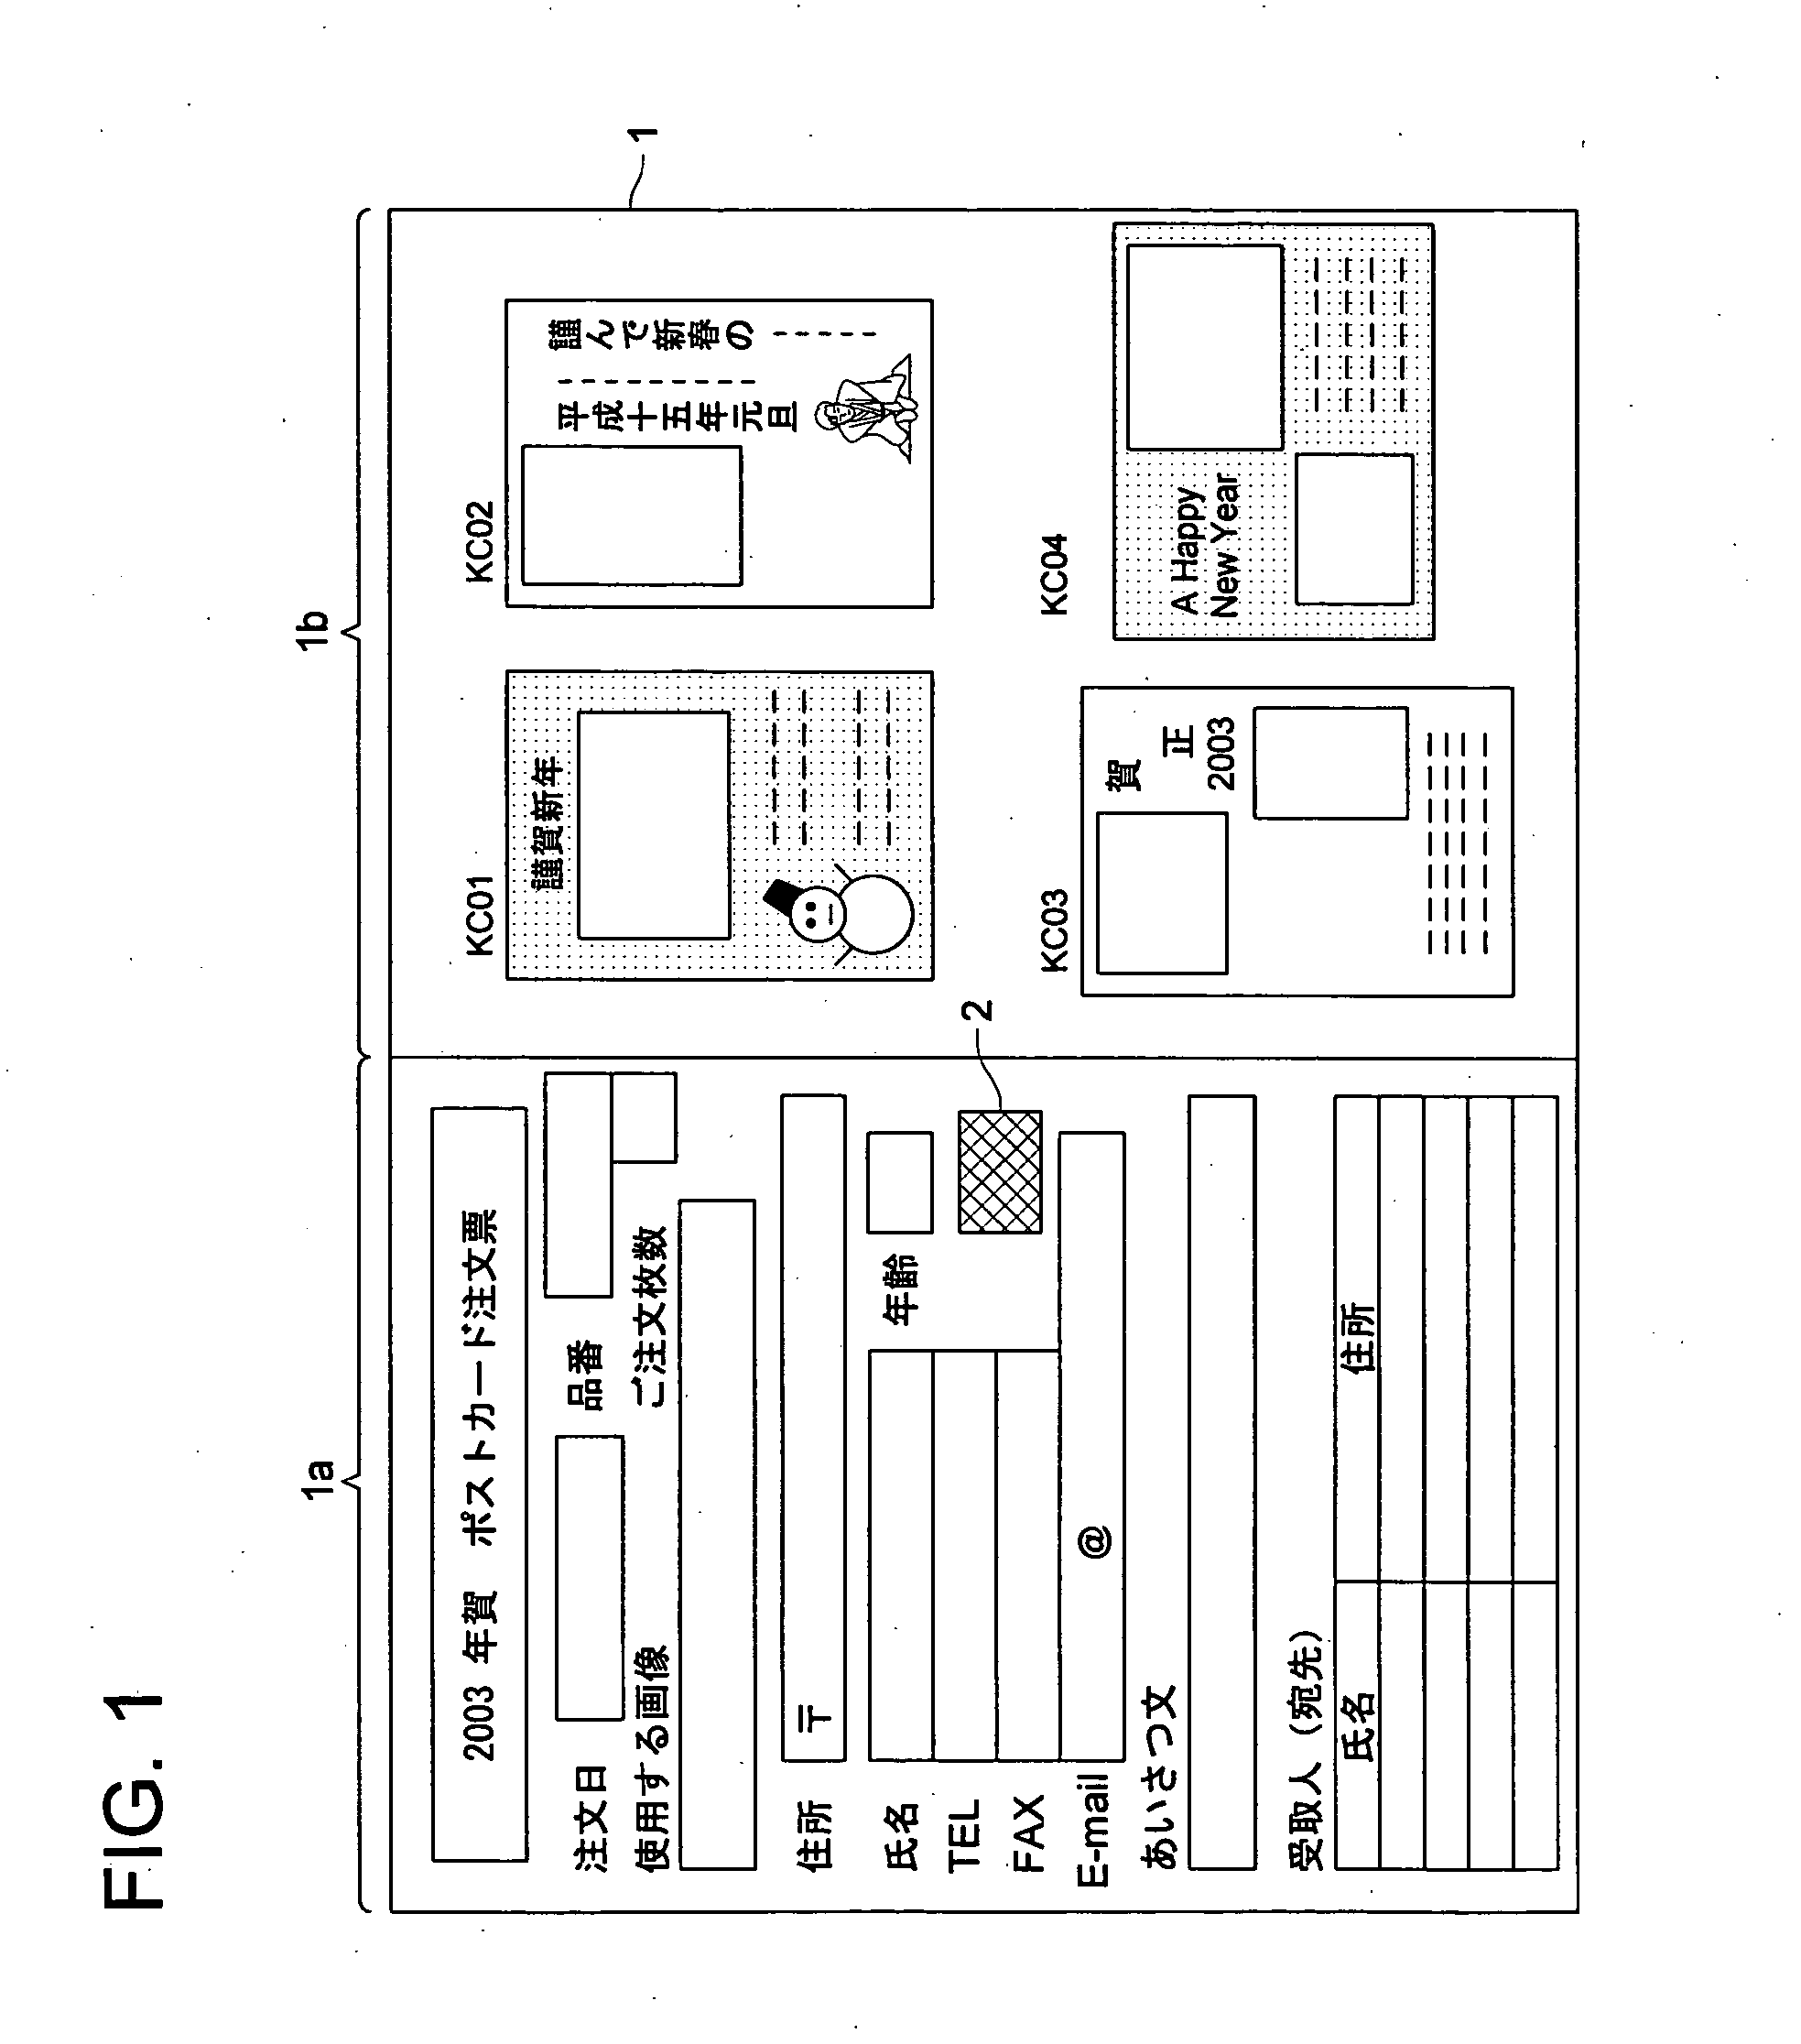 Print order sheet, information recording device, and print system